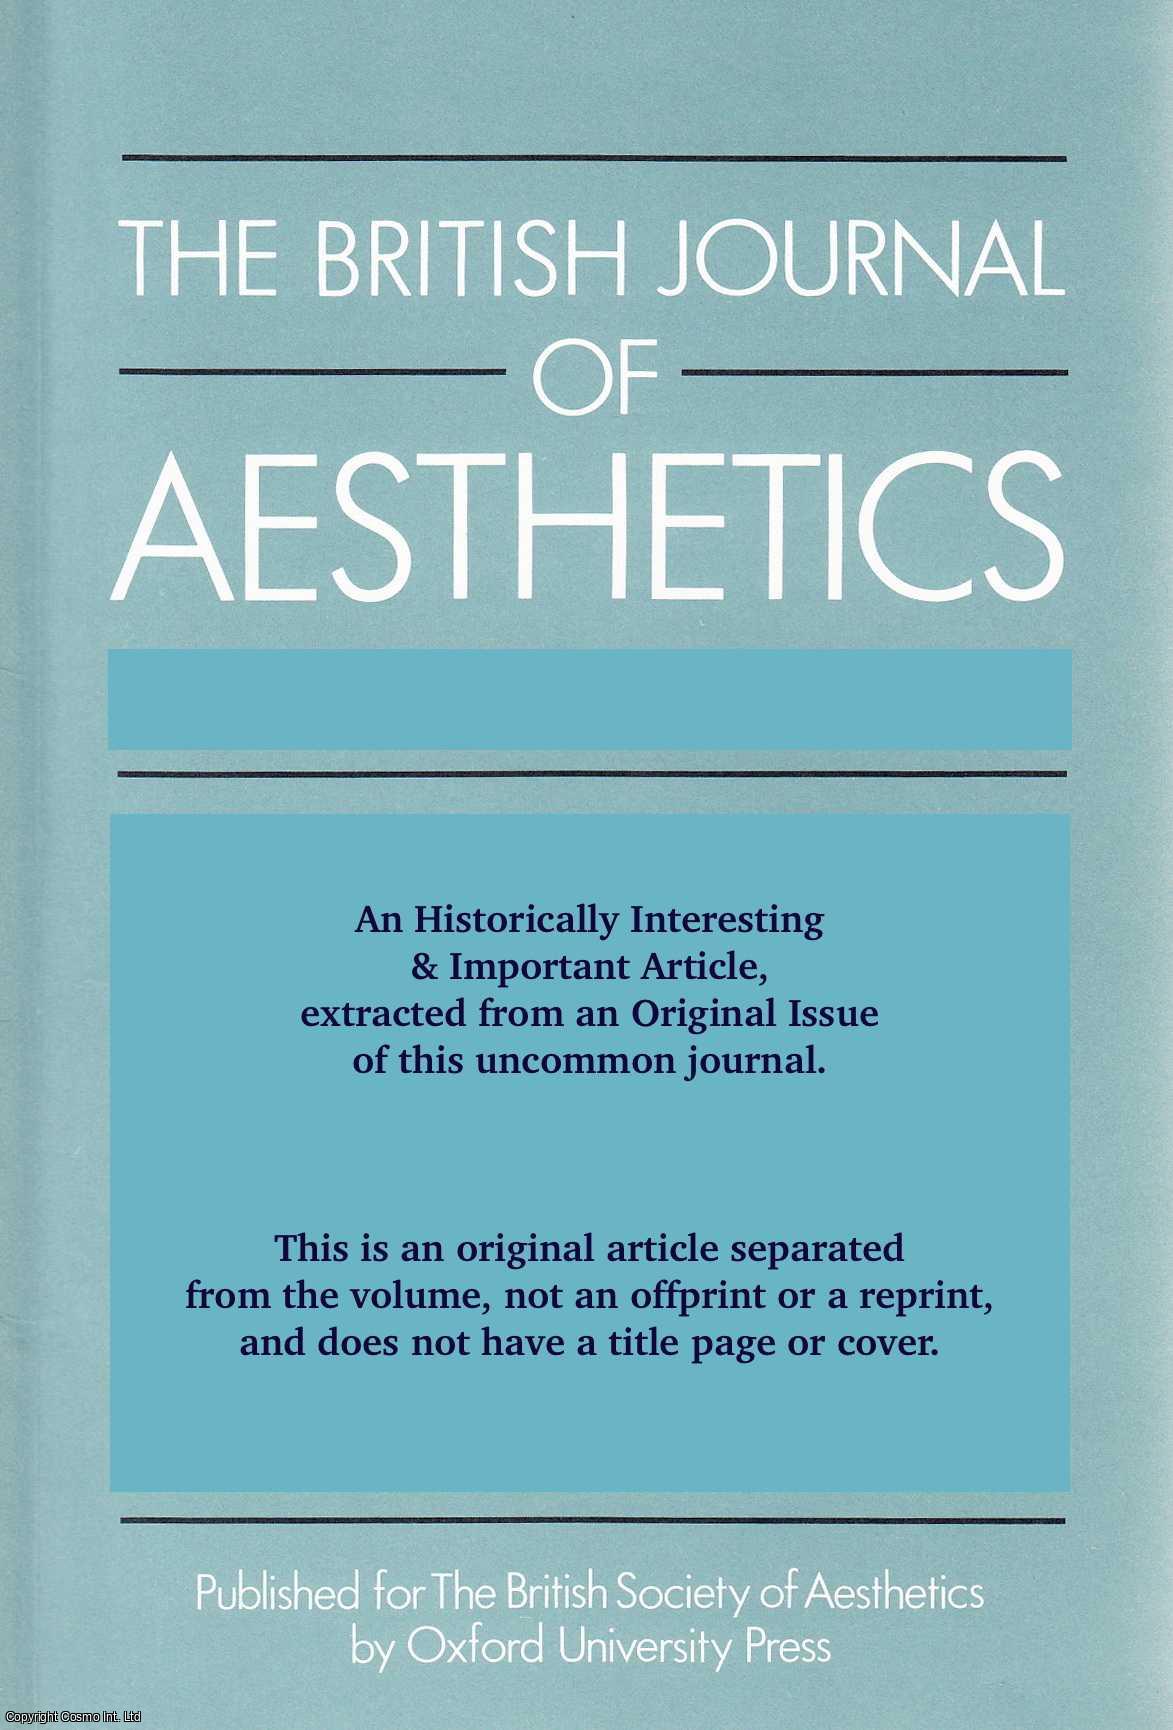 Peter Jones - Works of Art and Their Availability-For-Use. An original article from the British Journal of Aesthetics, 1971.